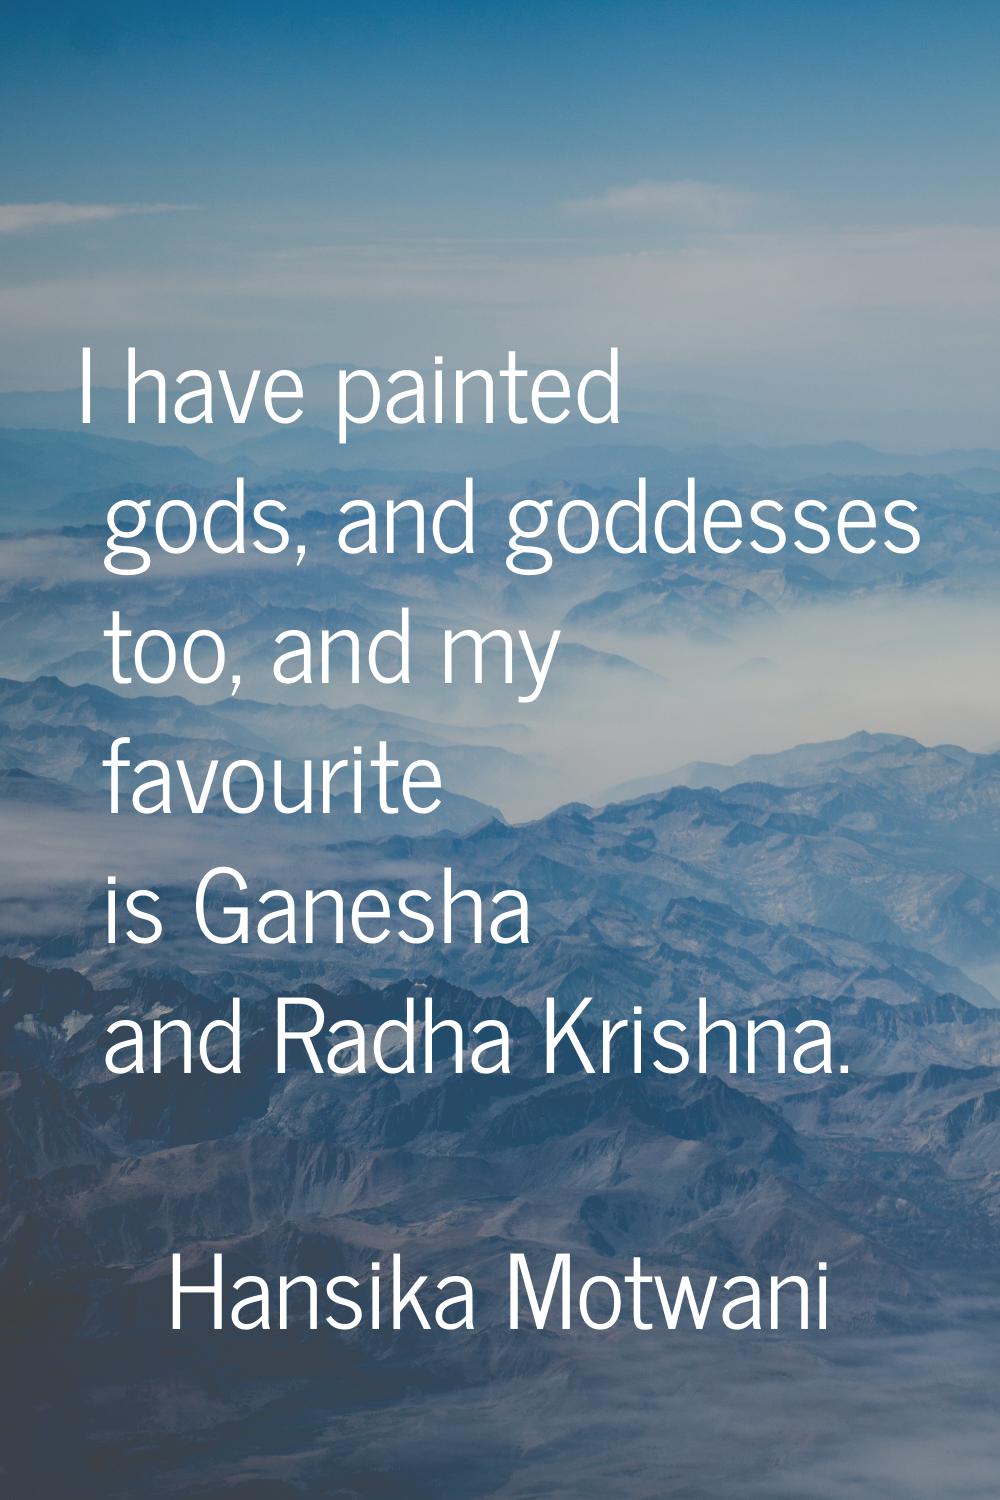 I have painted gods, and goddesses too, and my favourite is Ganesha and Radha Krishna.